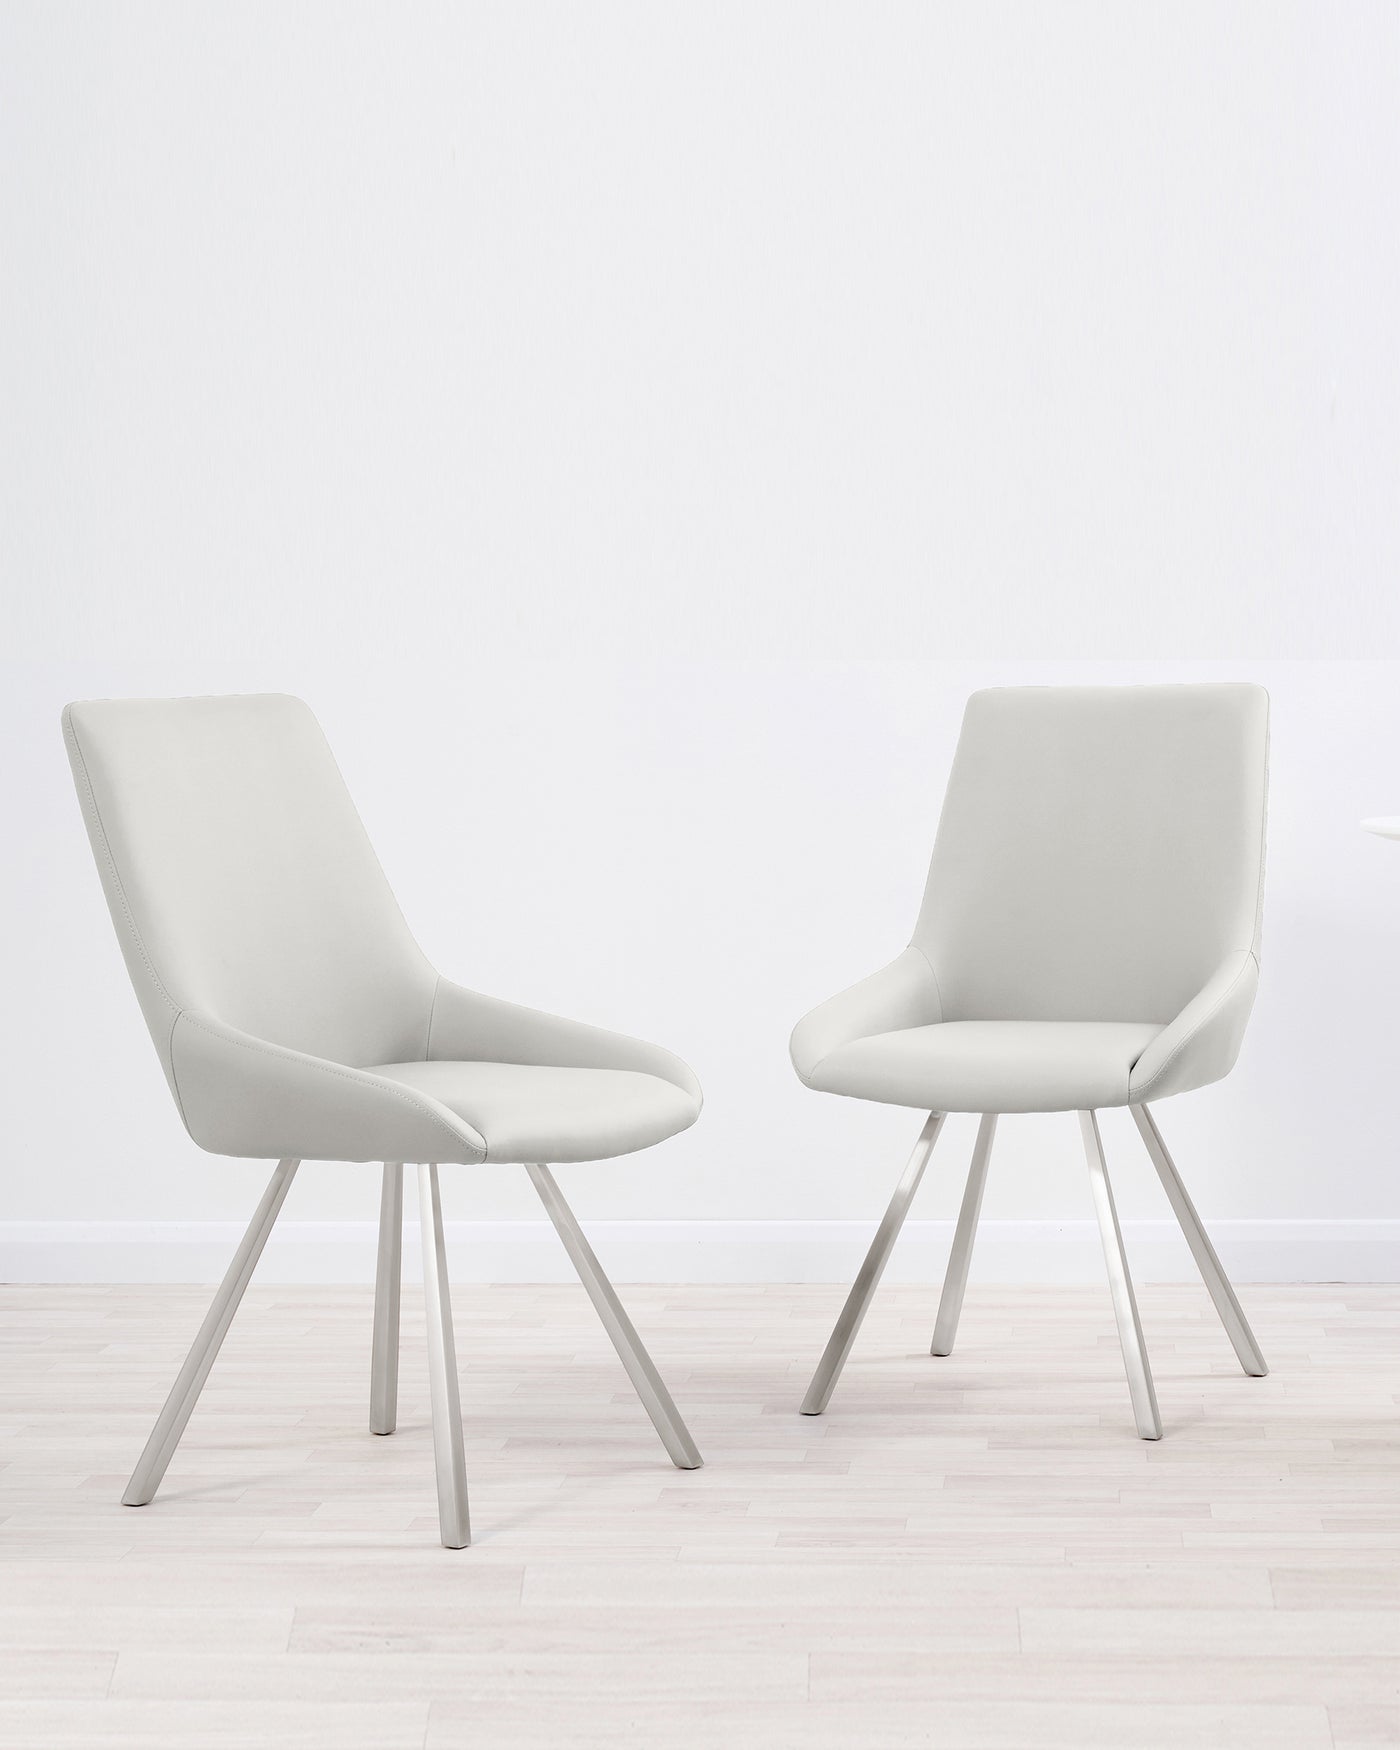 Two modern light grey upholstered dining chairs with a sleek design and splayed metal legs, set on a light hardwood floor against a white wall.